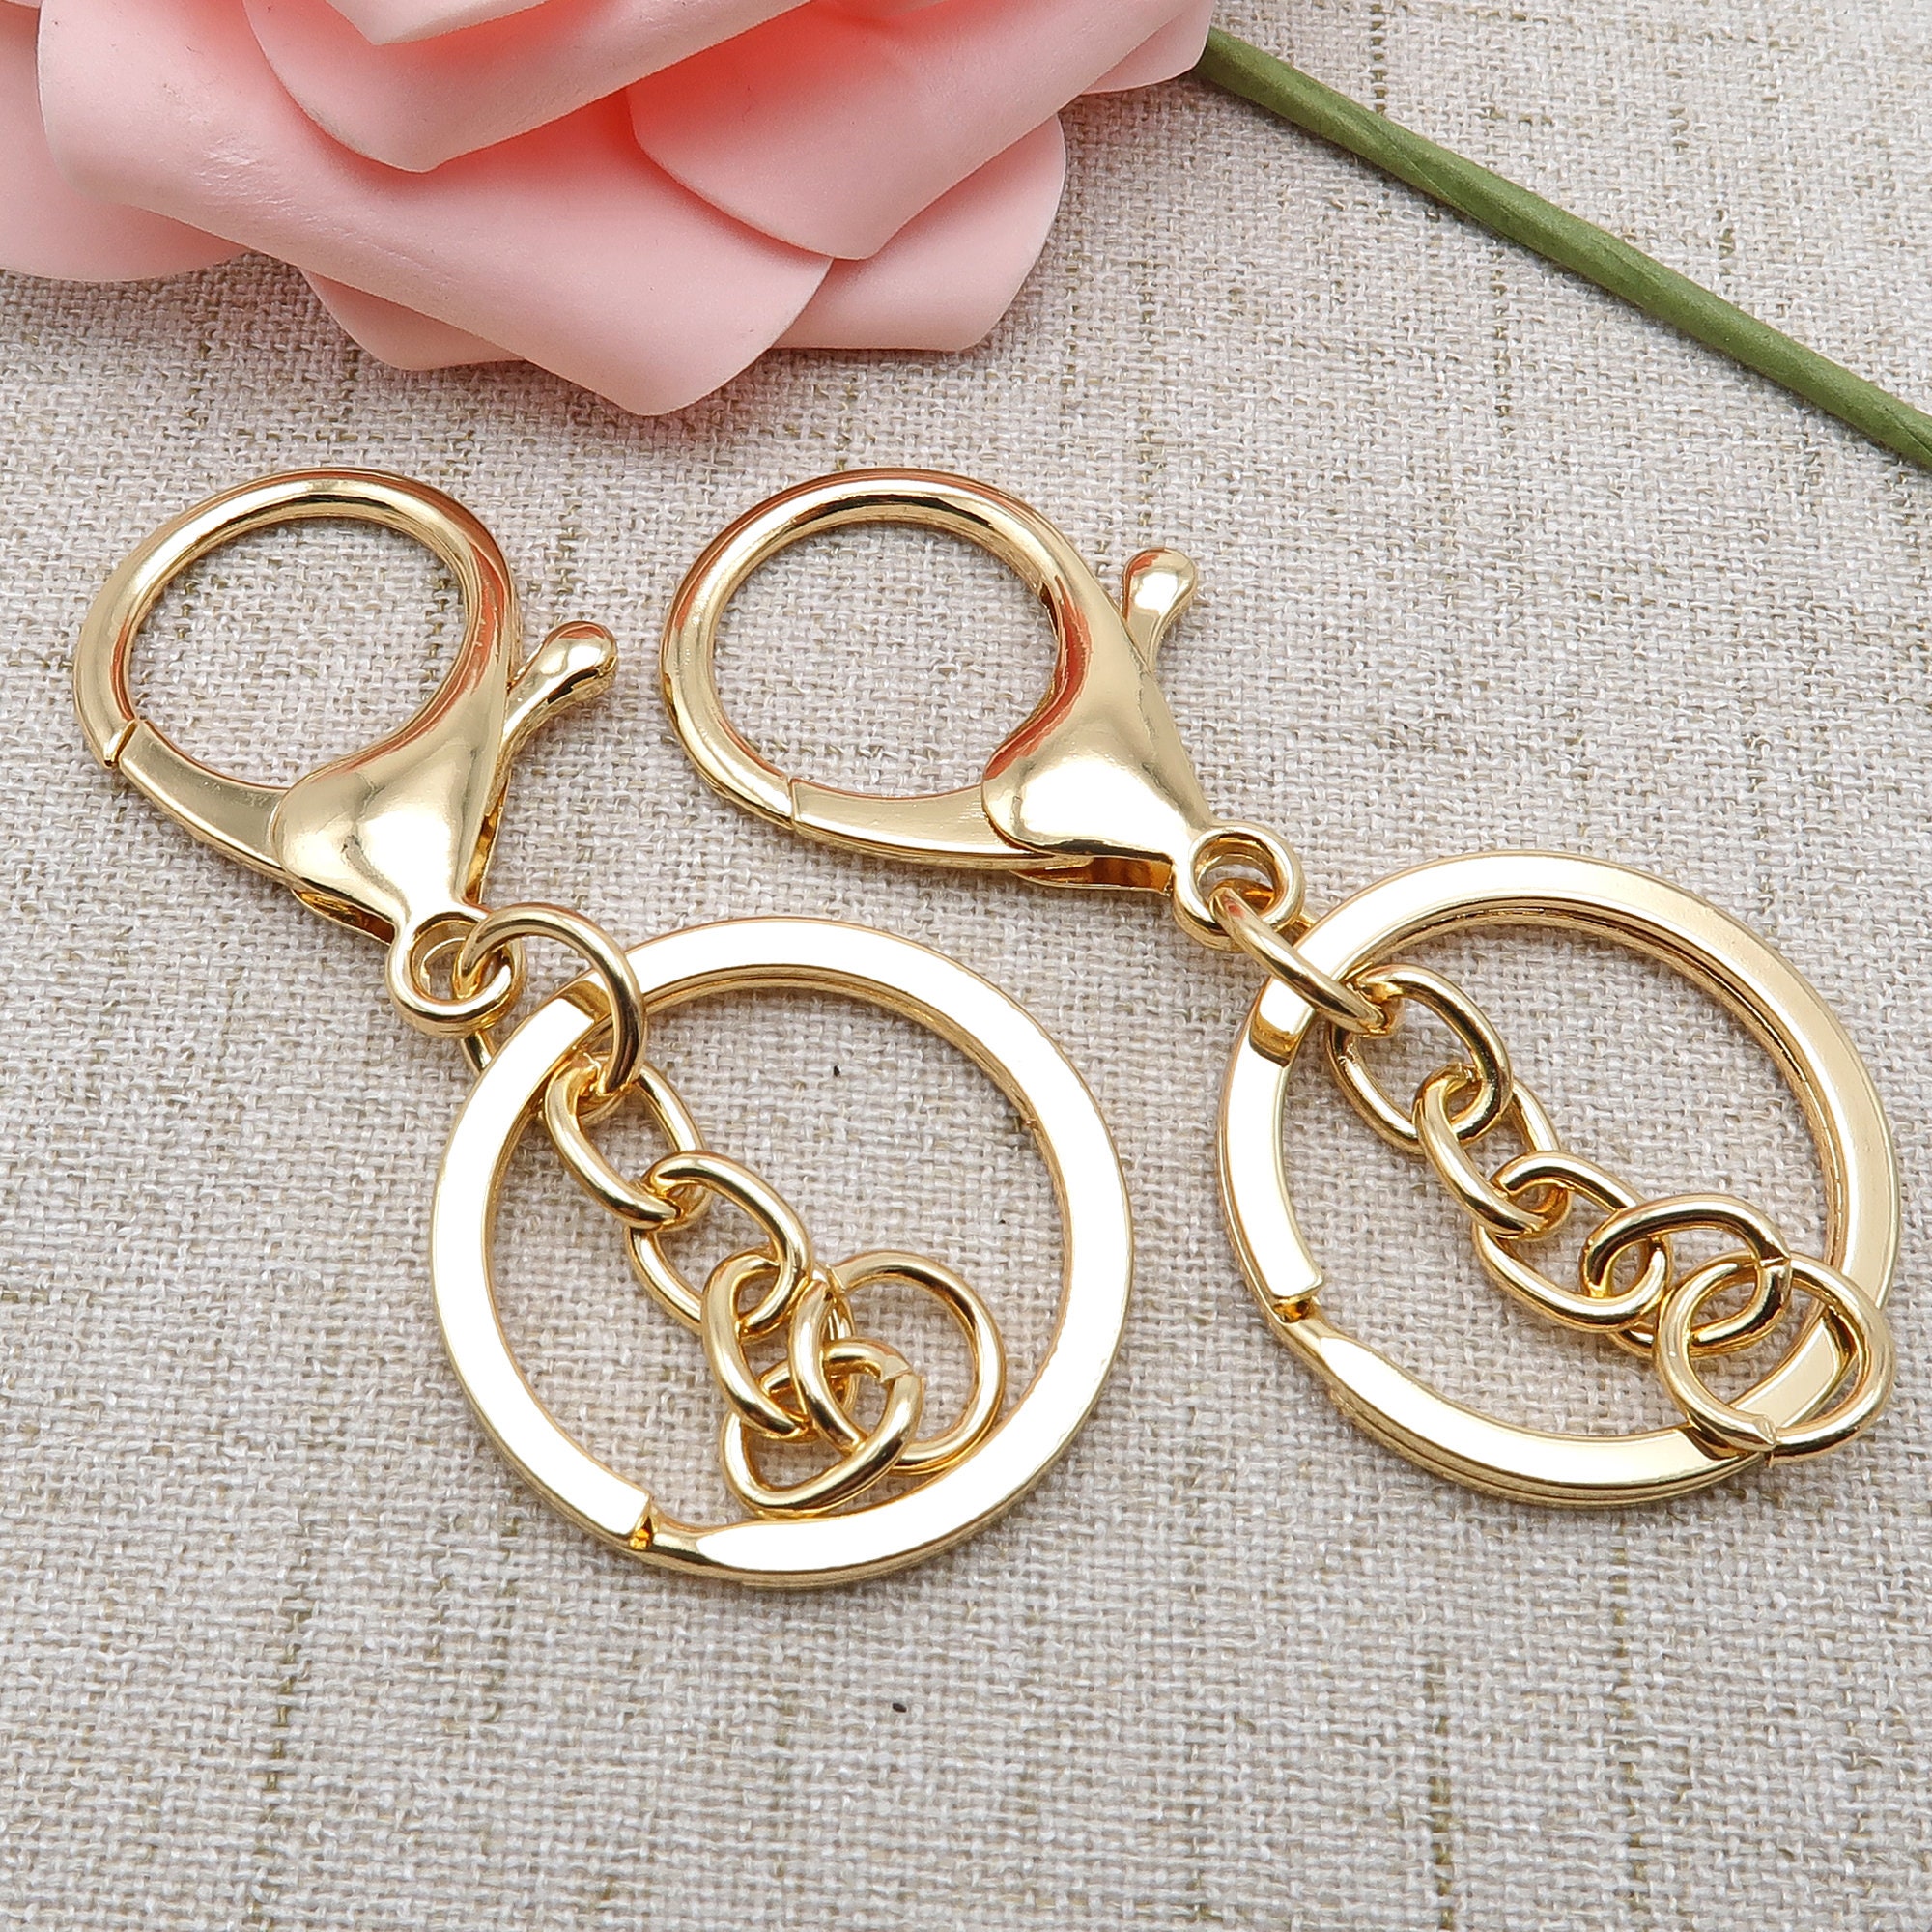 20pcs/lot Metal Key Rings Key Chains with Lobster Clasps Gold/Rhodium Color  Tone Keyrings Split Rings KeyChains Wholesale Z434